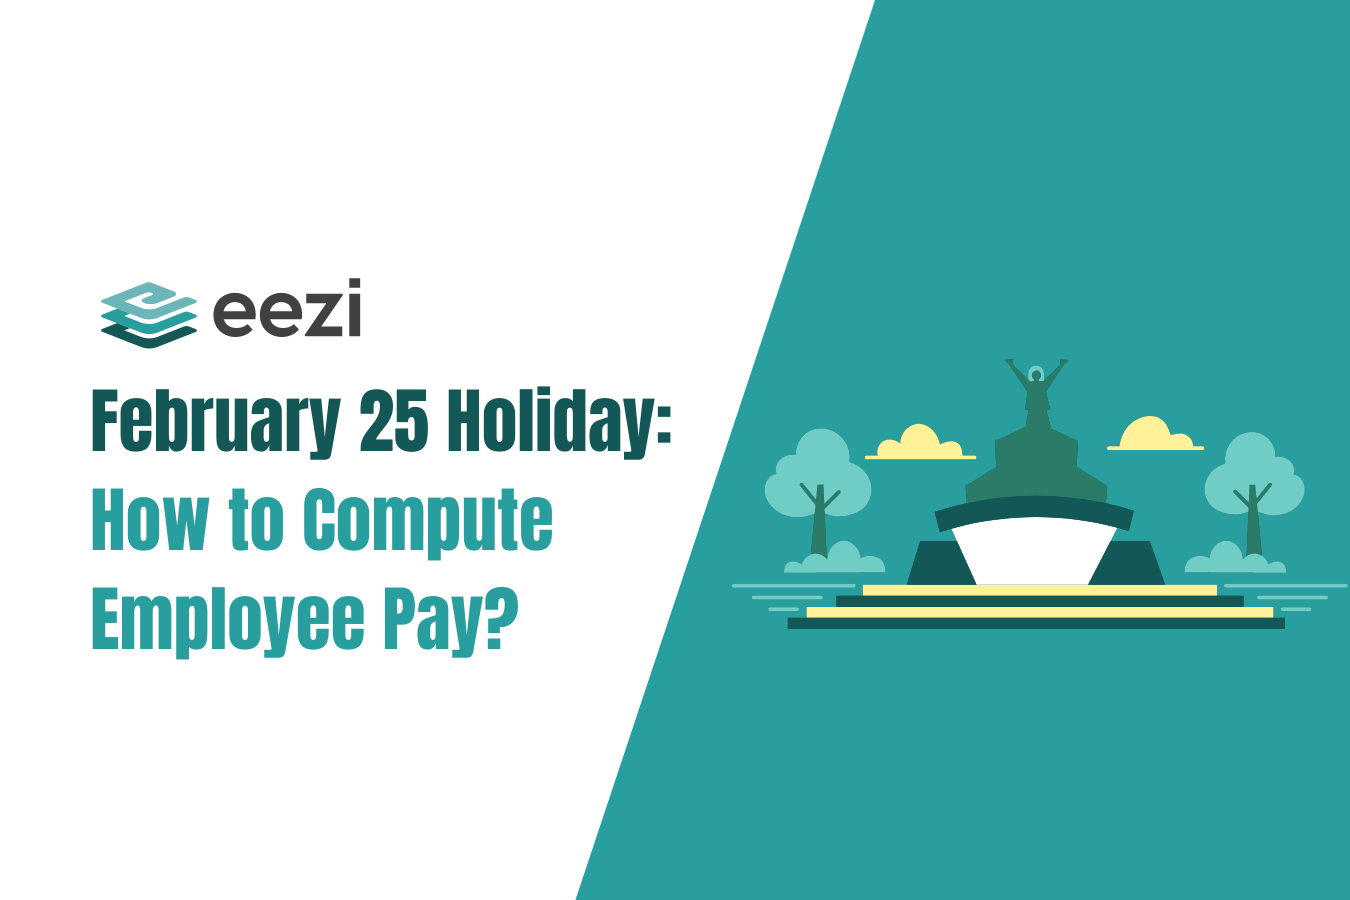 February 25 Holiday: How to Compute Employee Pay?